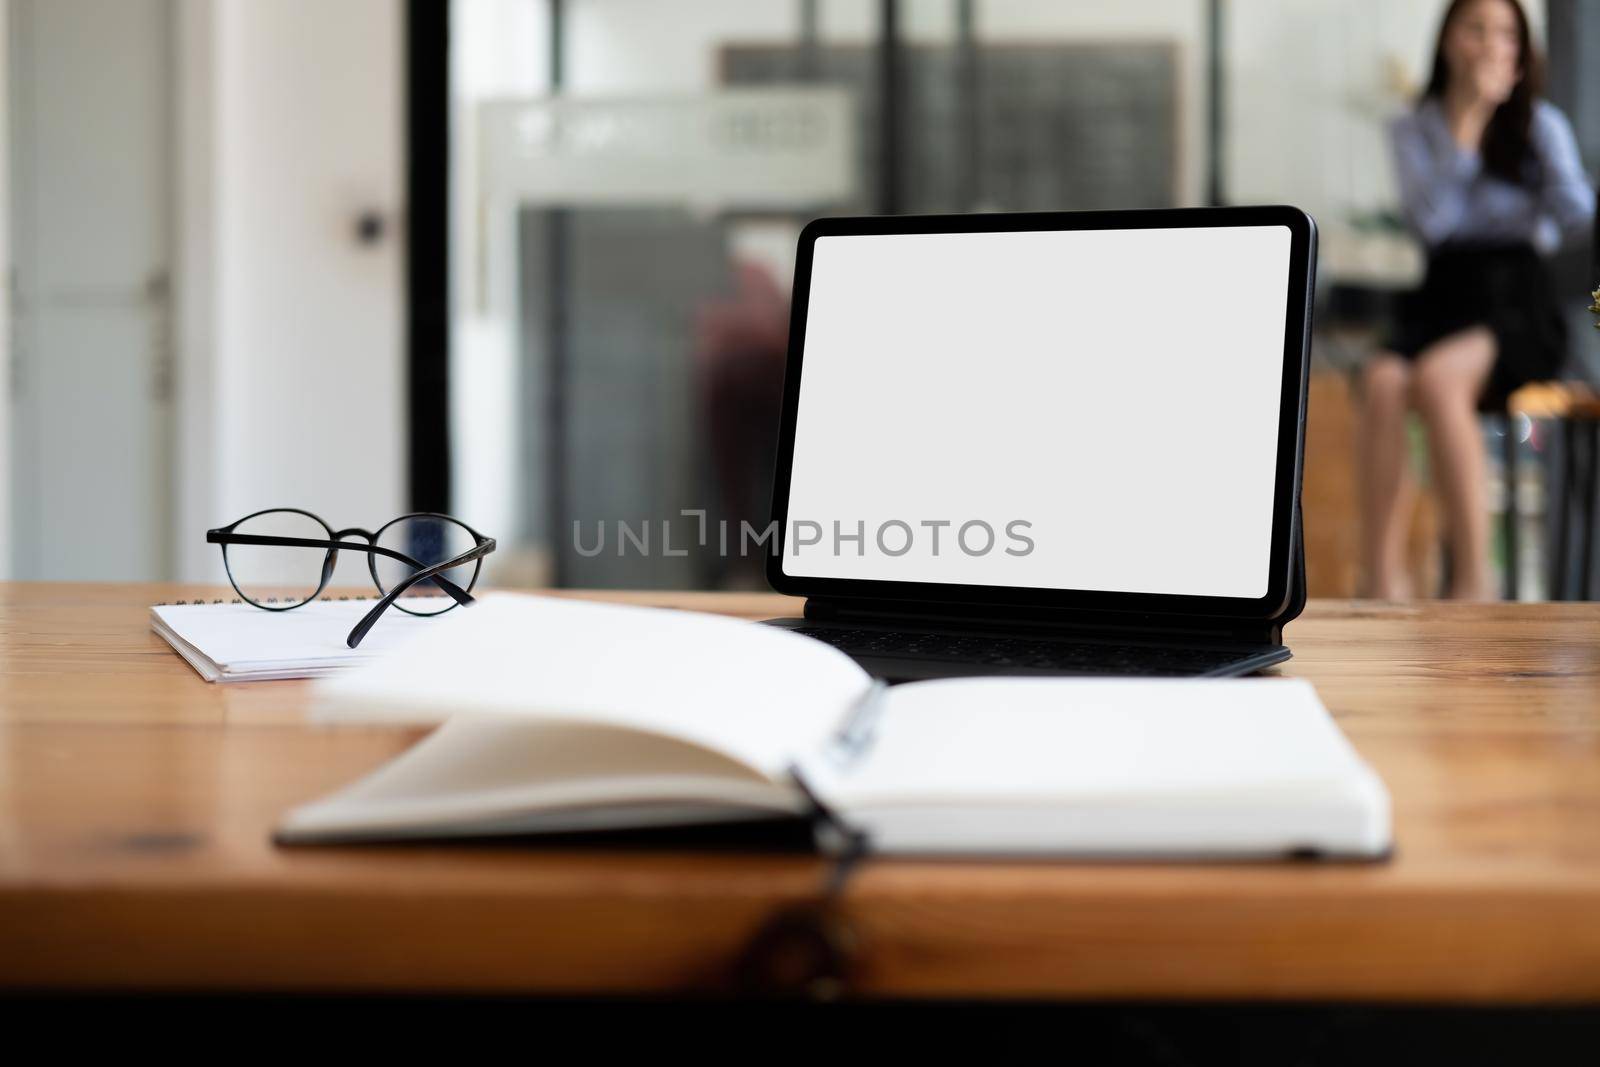 Shot of digital tablet with blank white screen, keyboard, cup of coffee on workspace desk.